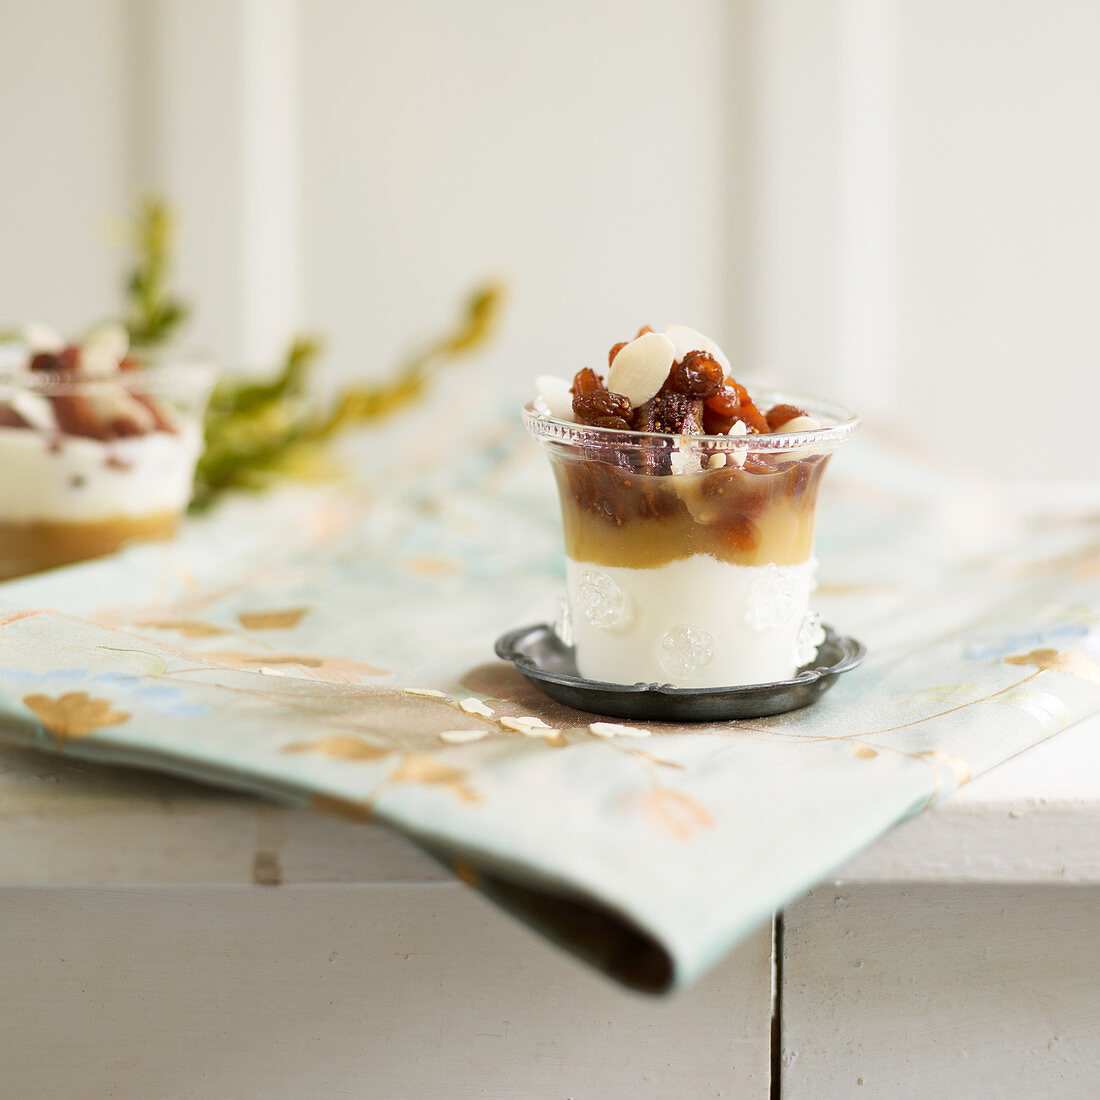 Cream cheese with dried fruit compote, nuts and honey